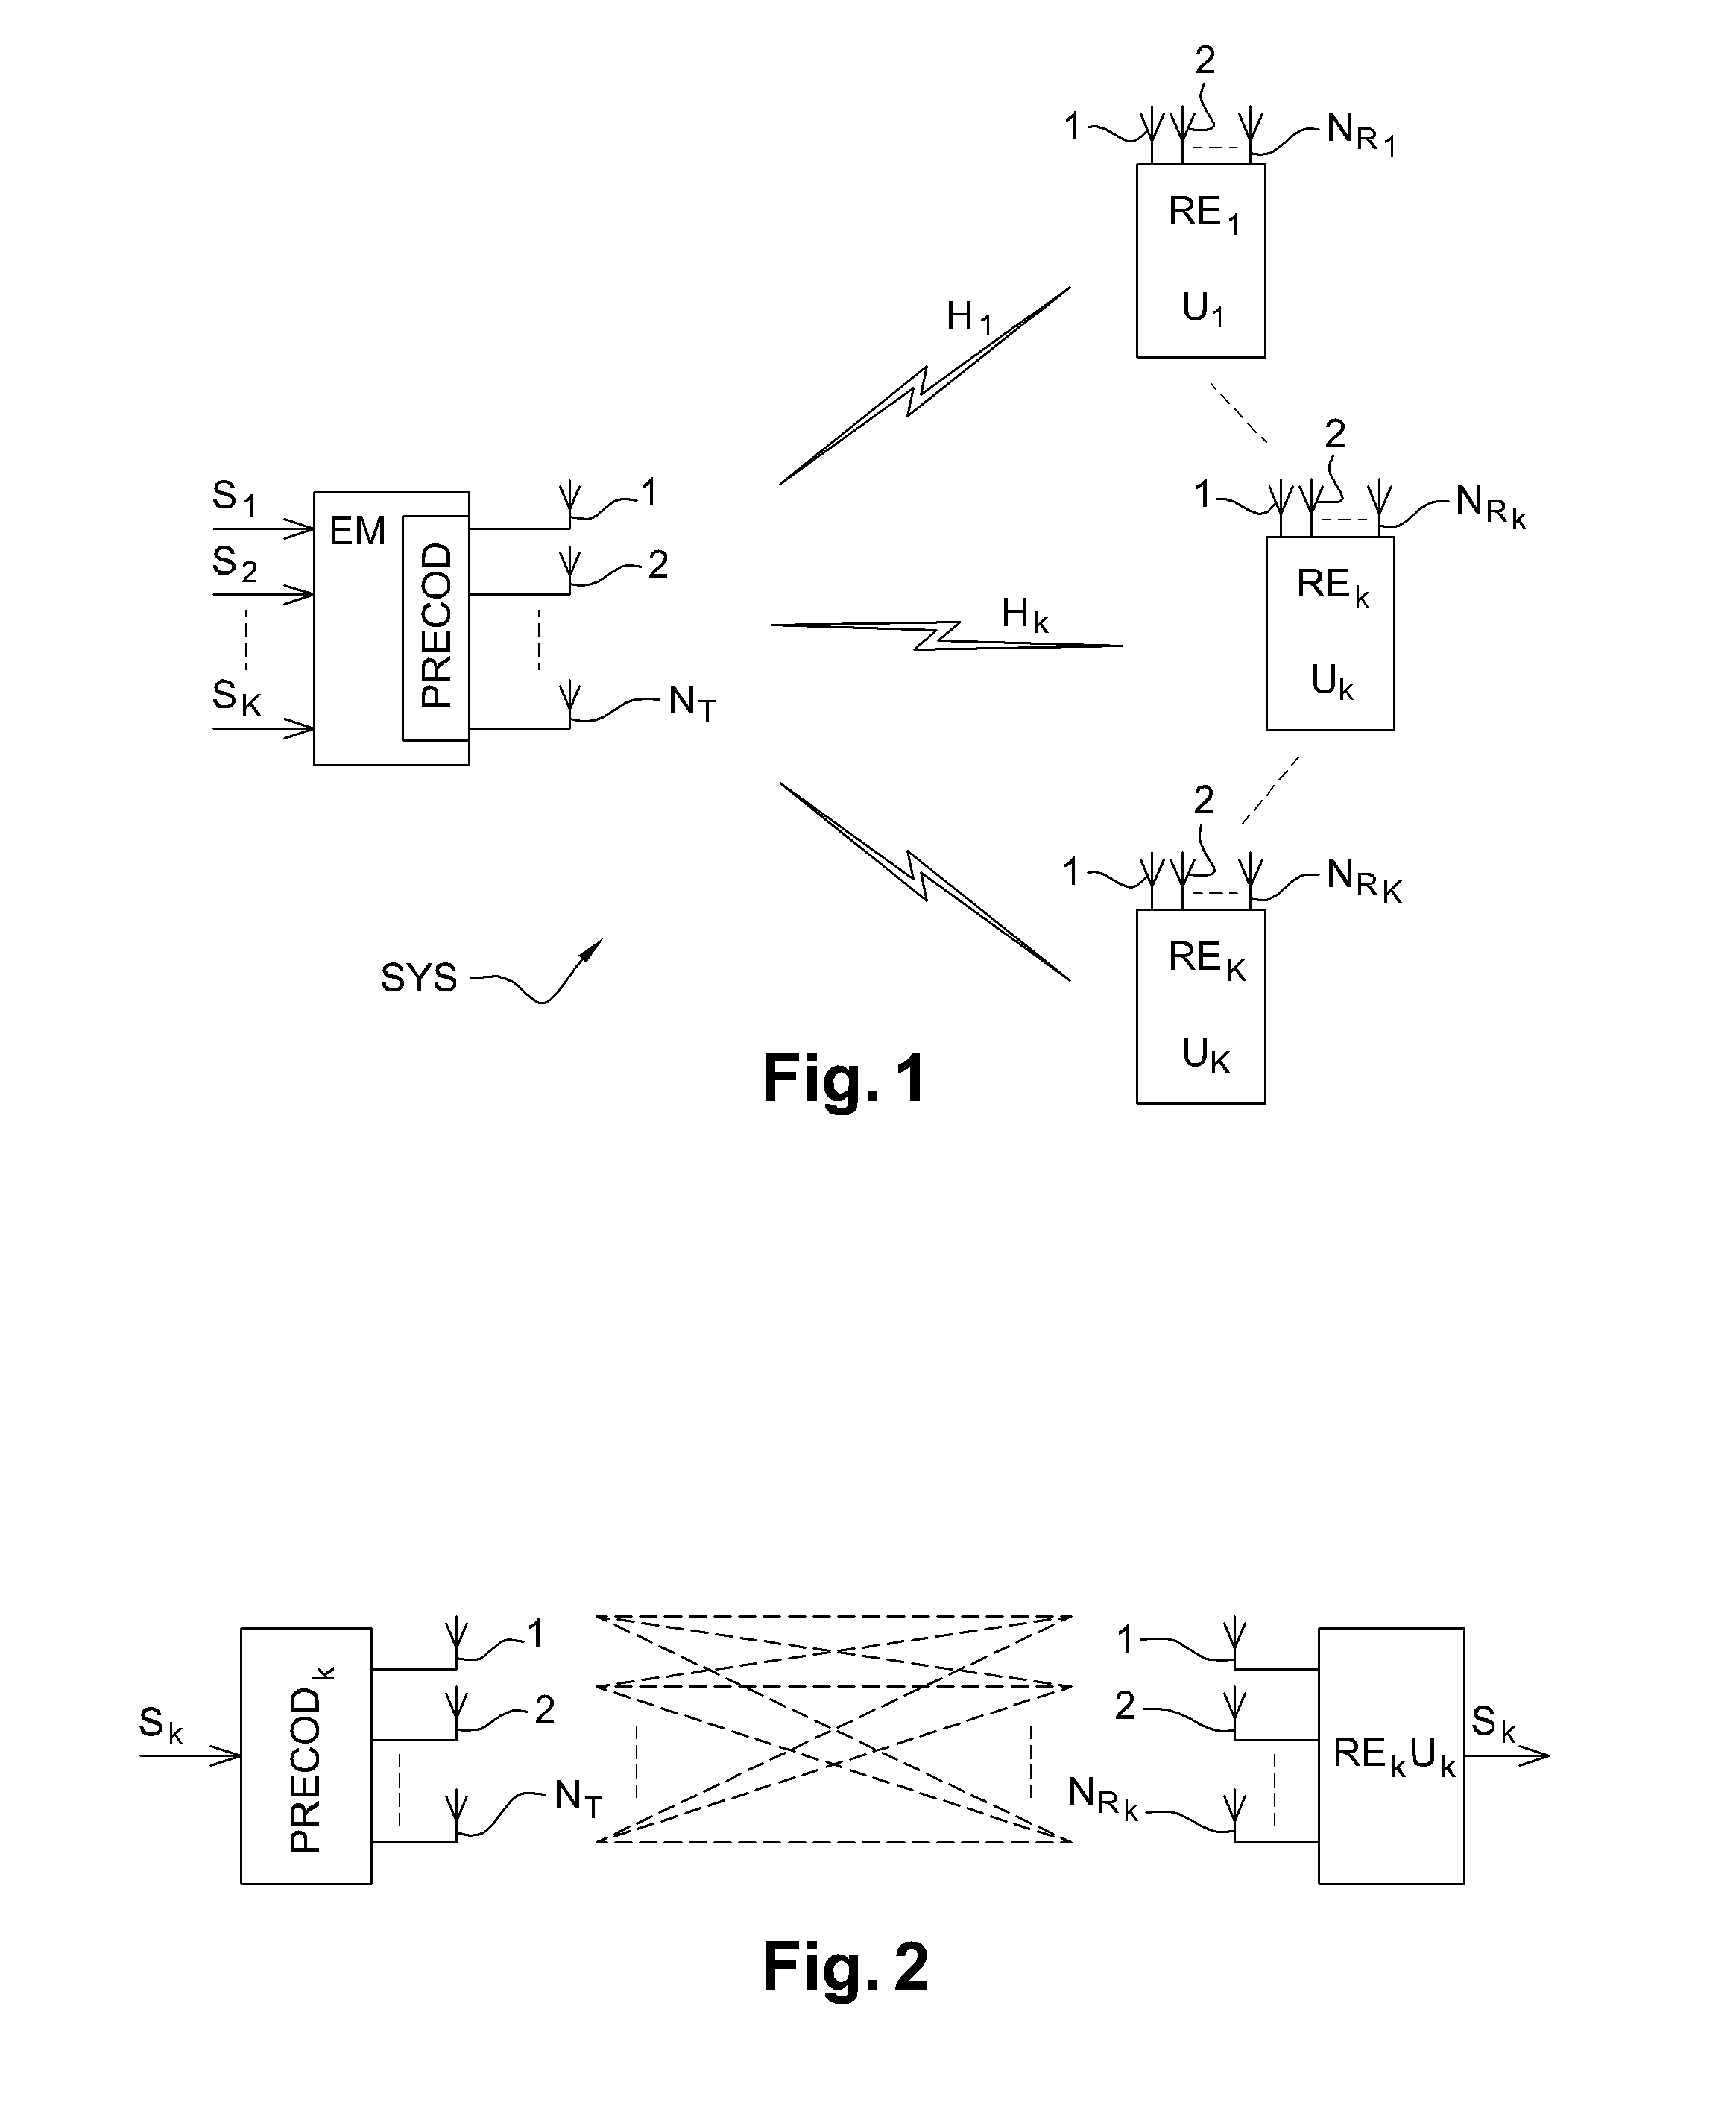 Method of transmitting a signal for a multi-user MIMO system, and corresponding transmitter, computer program product, and data medium